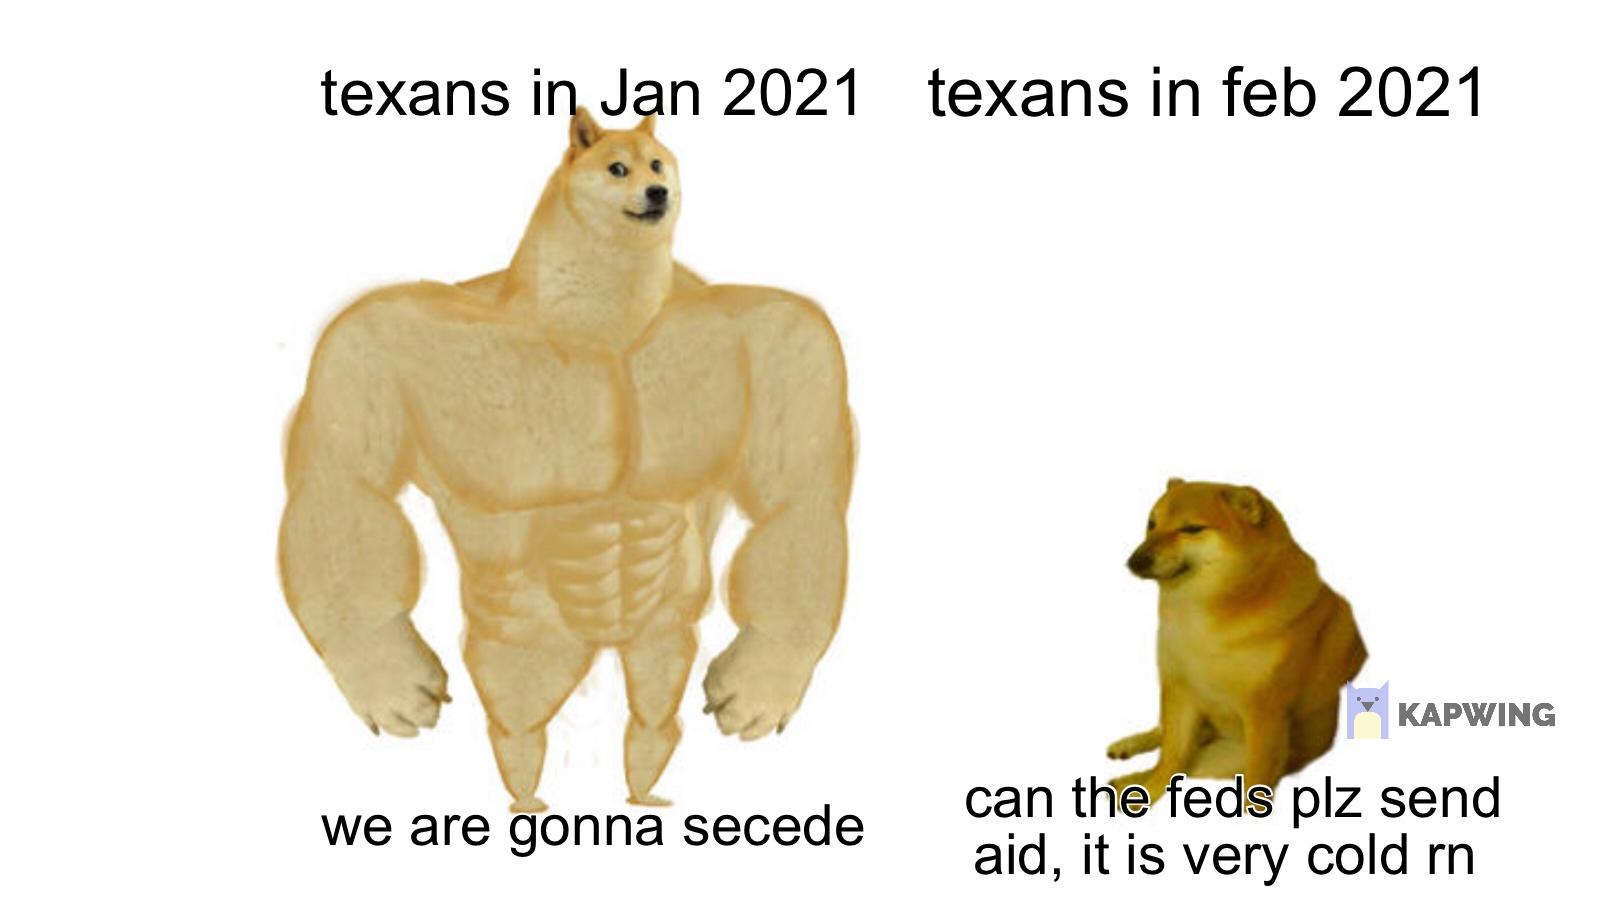 potato memes - texans in texans in Kapwing we are gonna secede can the feds plz send aid, it is very cold rn